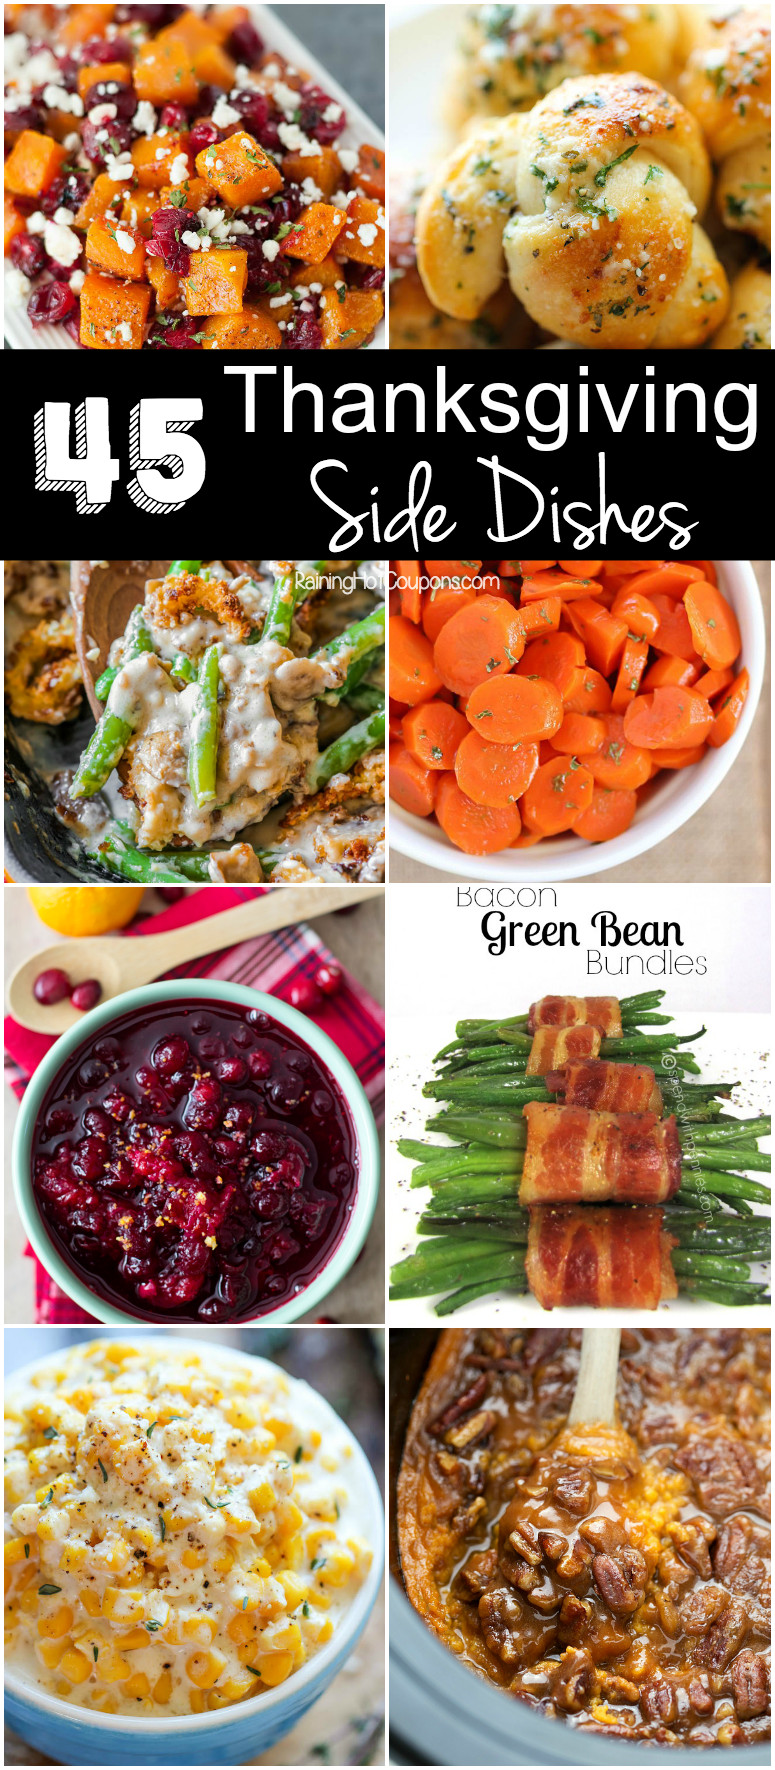 Popular Thanksgiving Side Dishes
 45 Thanksgiving Side Dishes